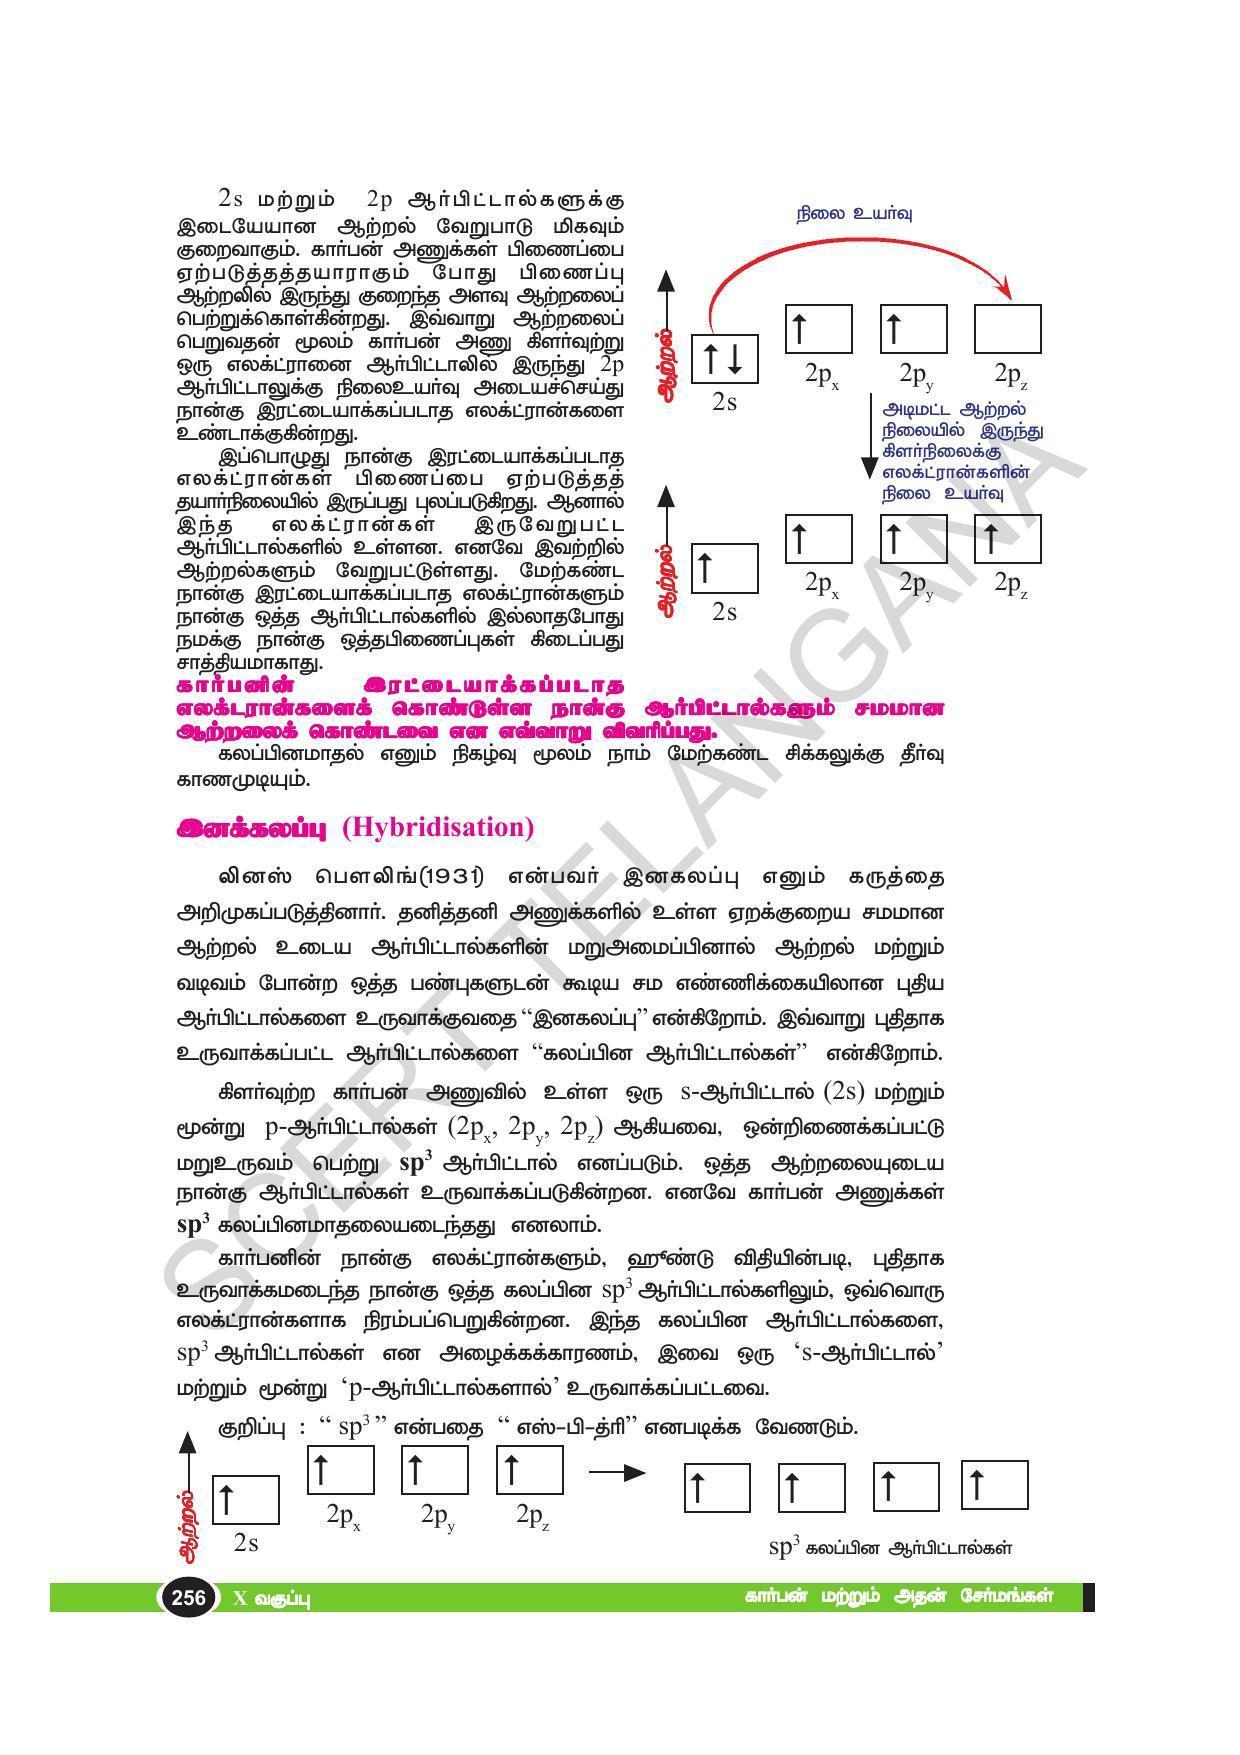 TS SCERT Class 10 Physical Science(Tamil Medium) Text Book - Page 268